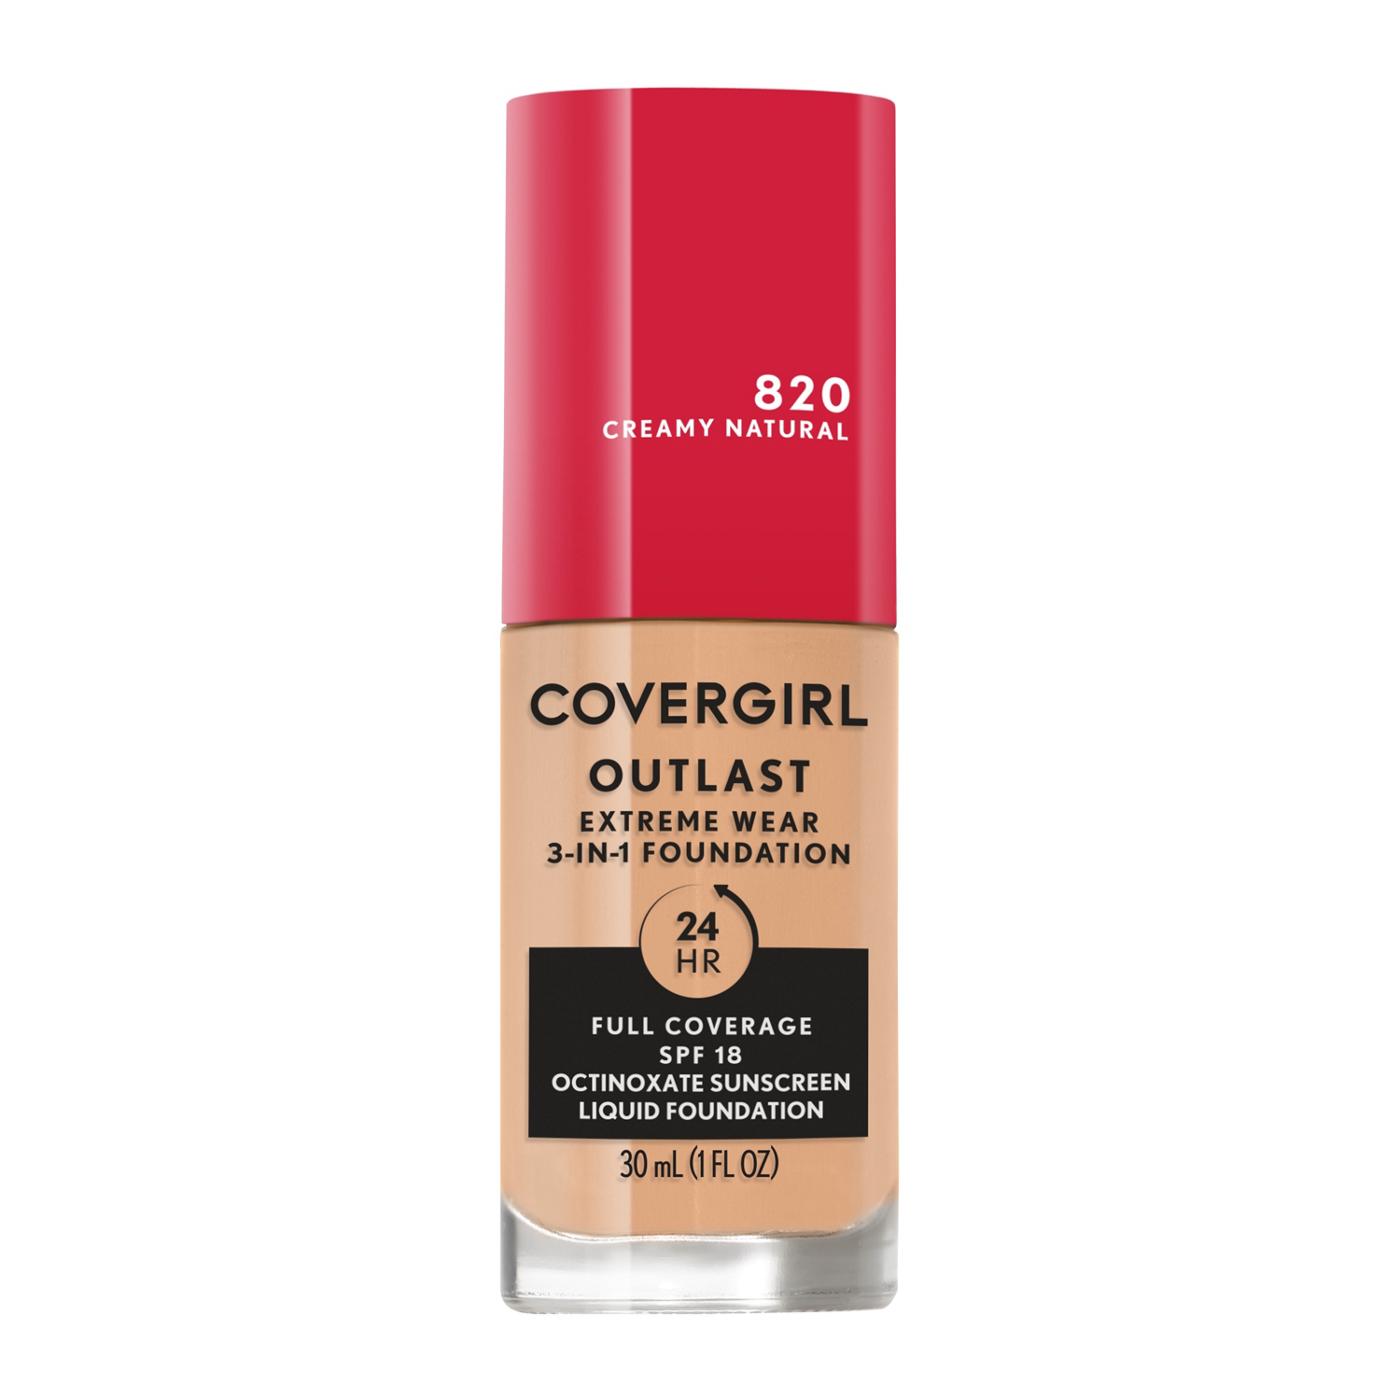 Covergirl Outlast Extreme Wear Liquid Foundation 820 Creamy Natural; image 1 of 11